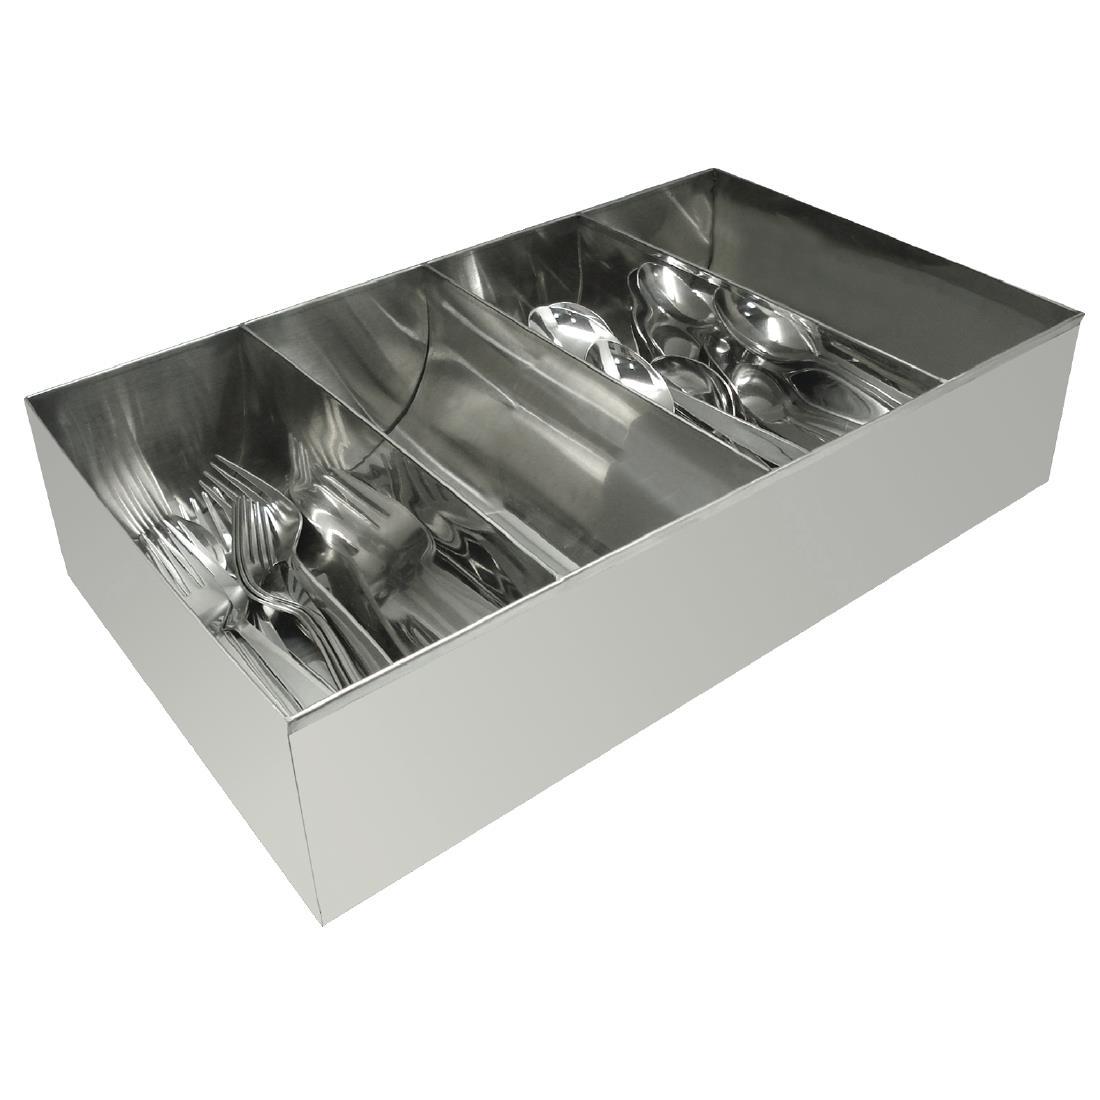 Olympia Cutlery Holder Stainless Steel - DM274  - 1